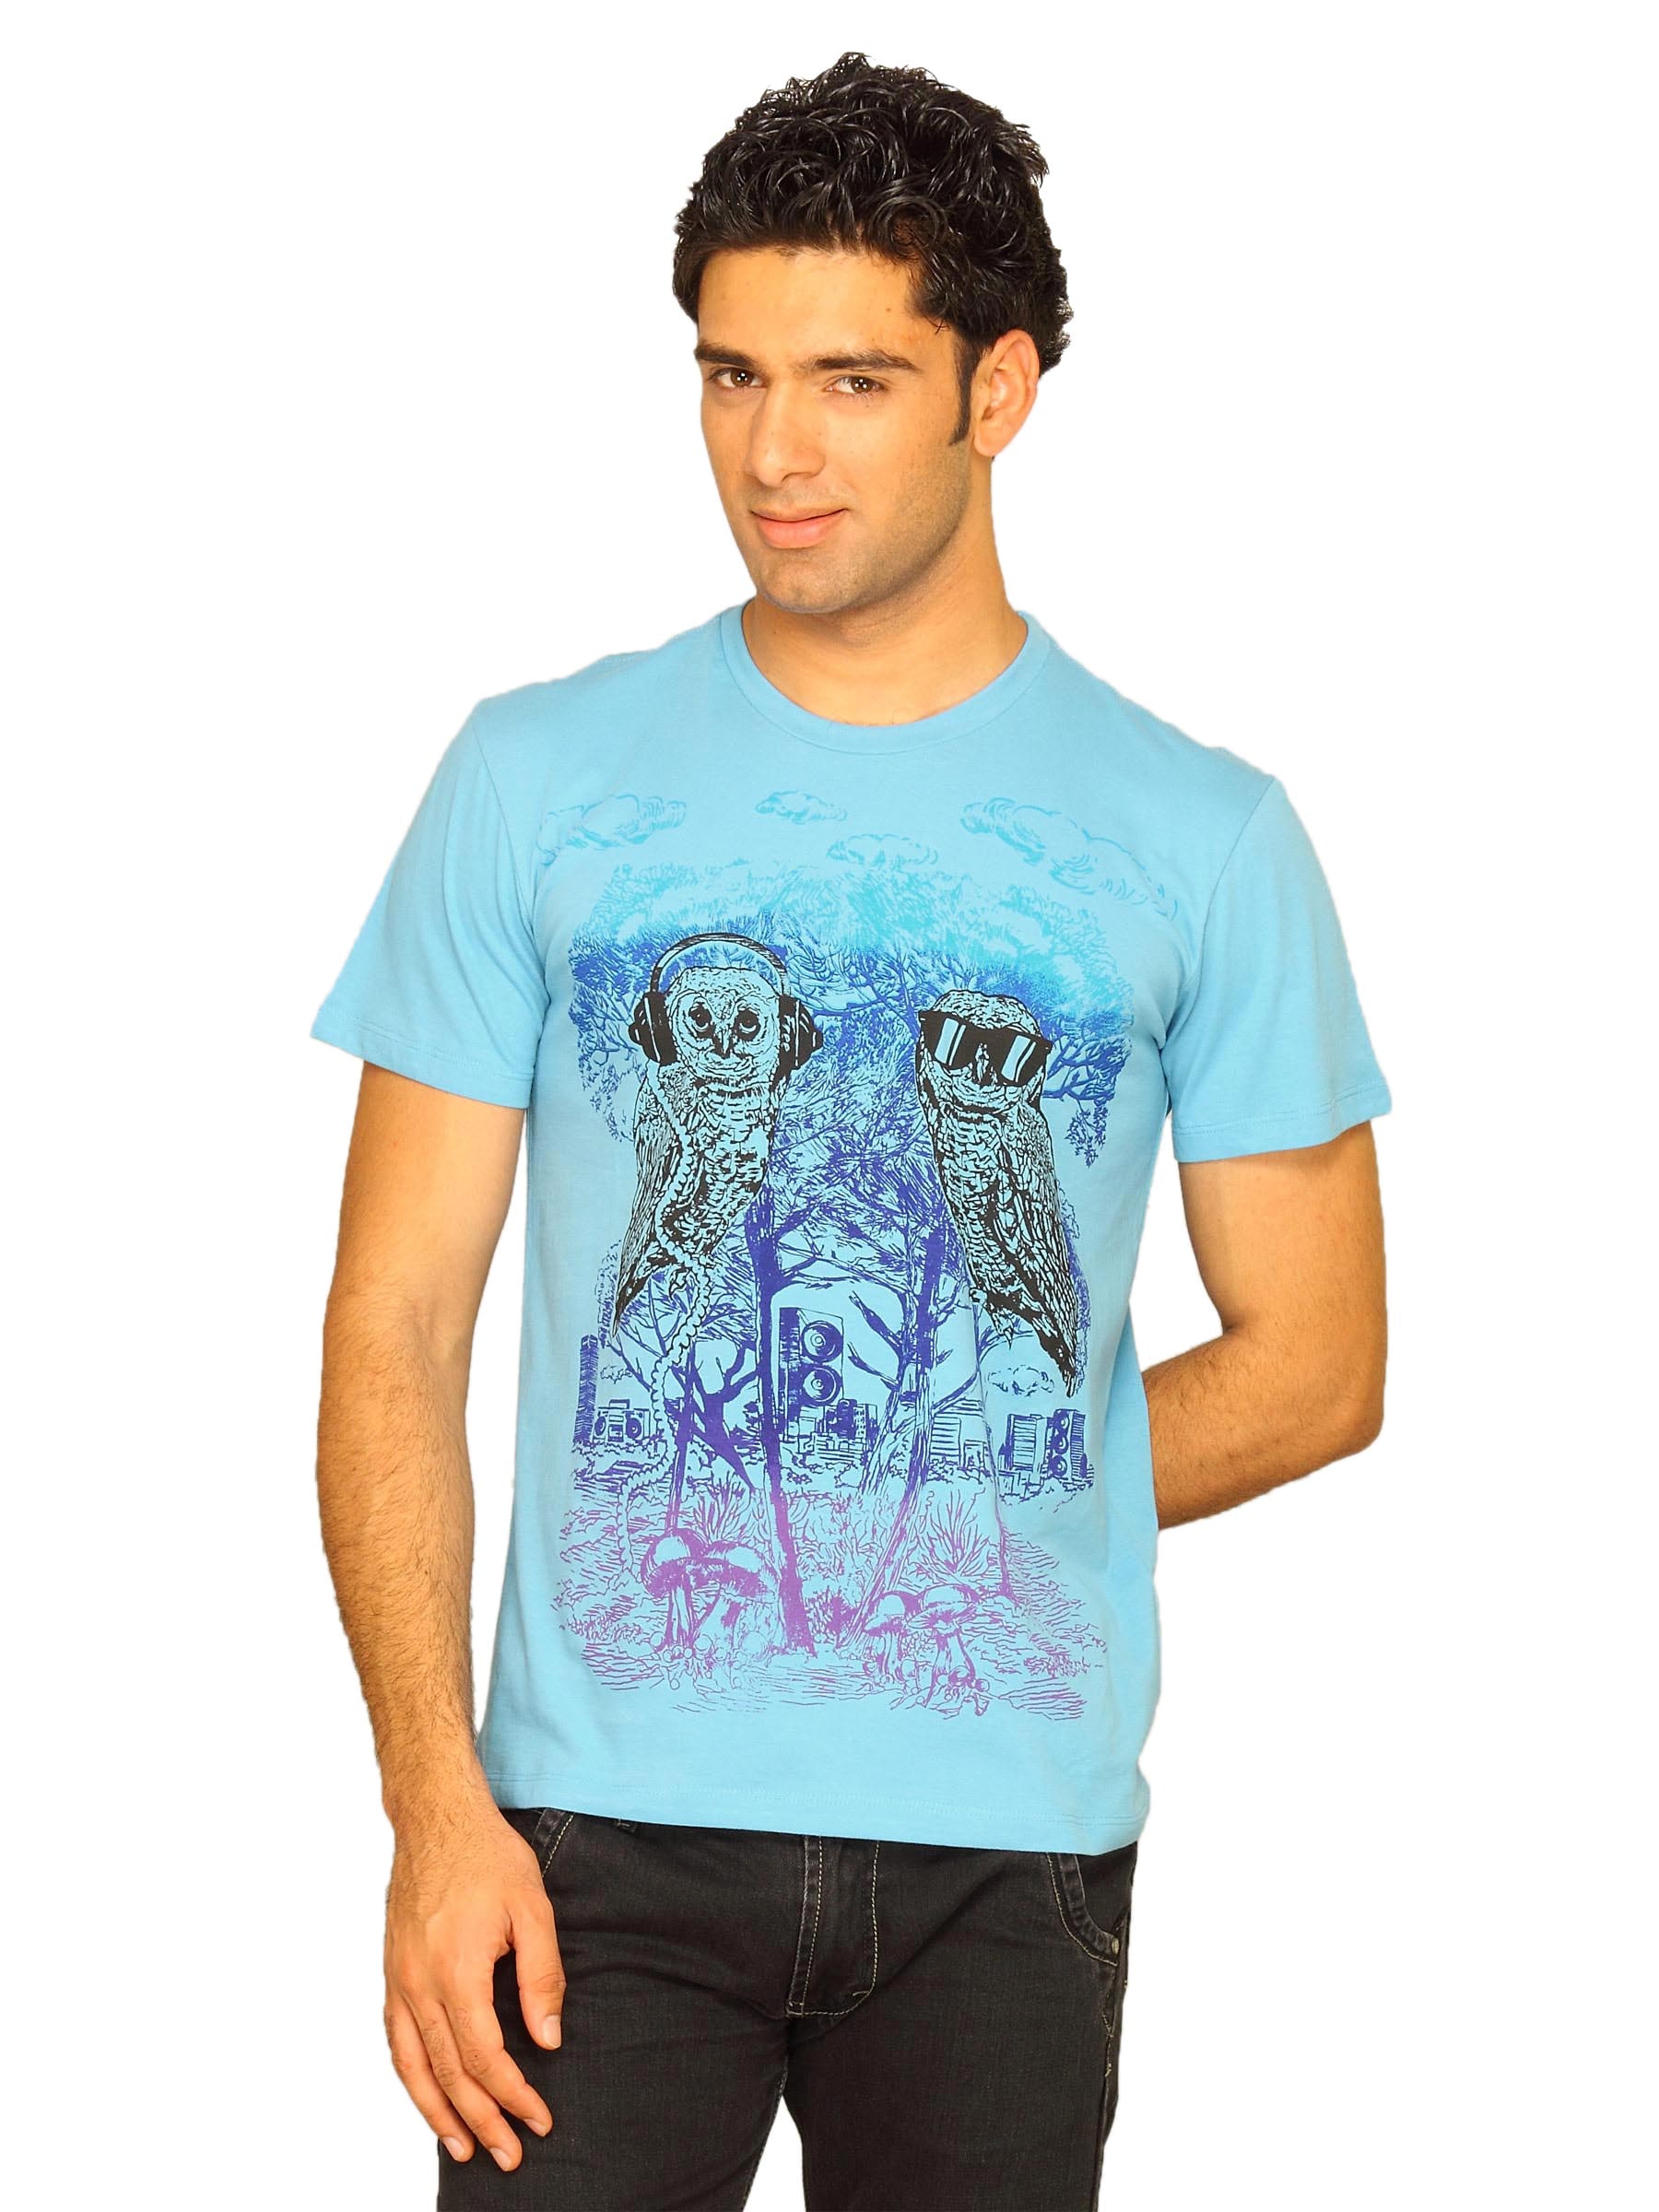 Free Authority Men's Owls With Glasses Blue T-shirt